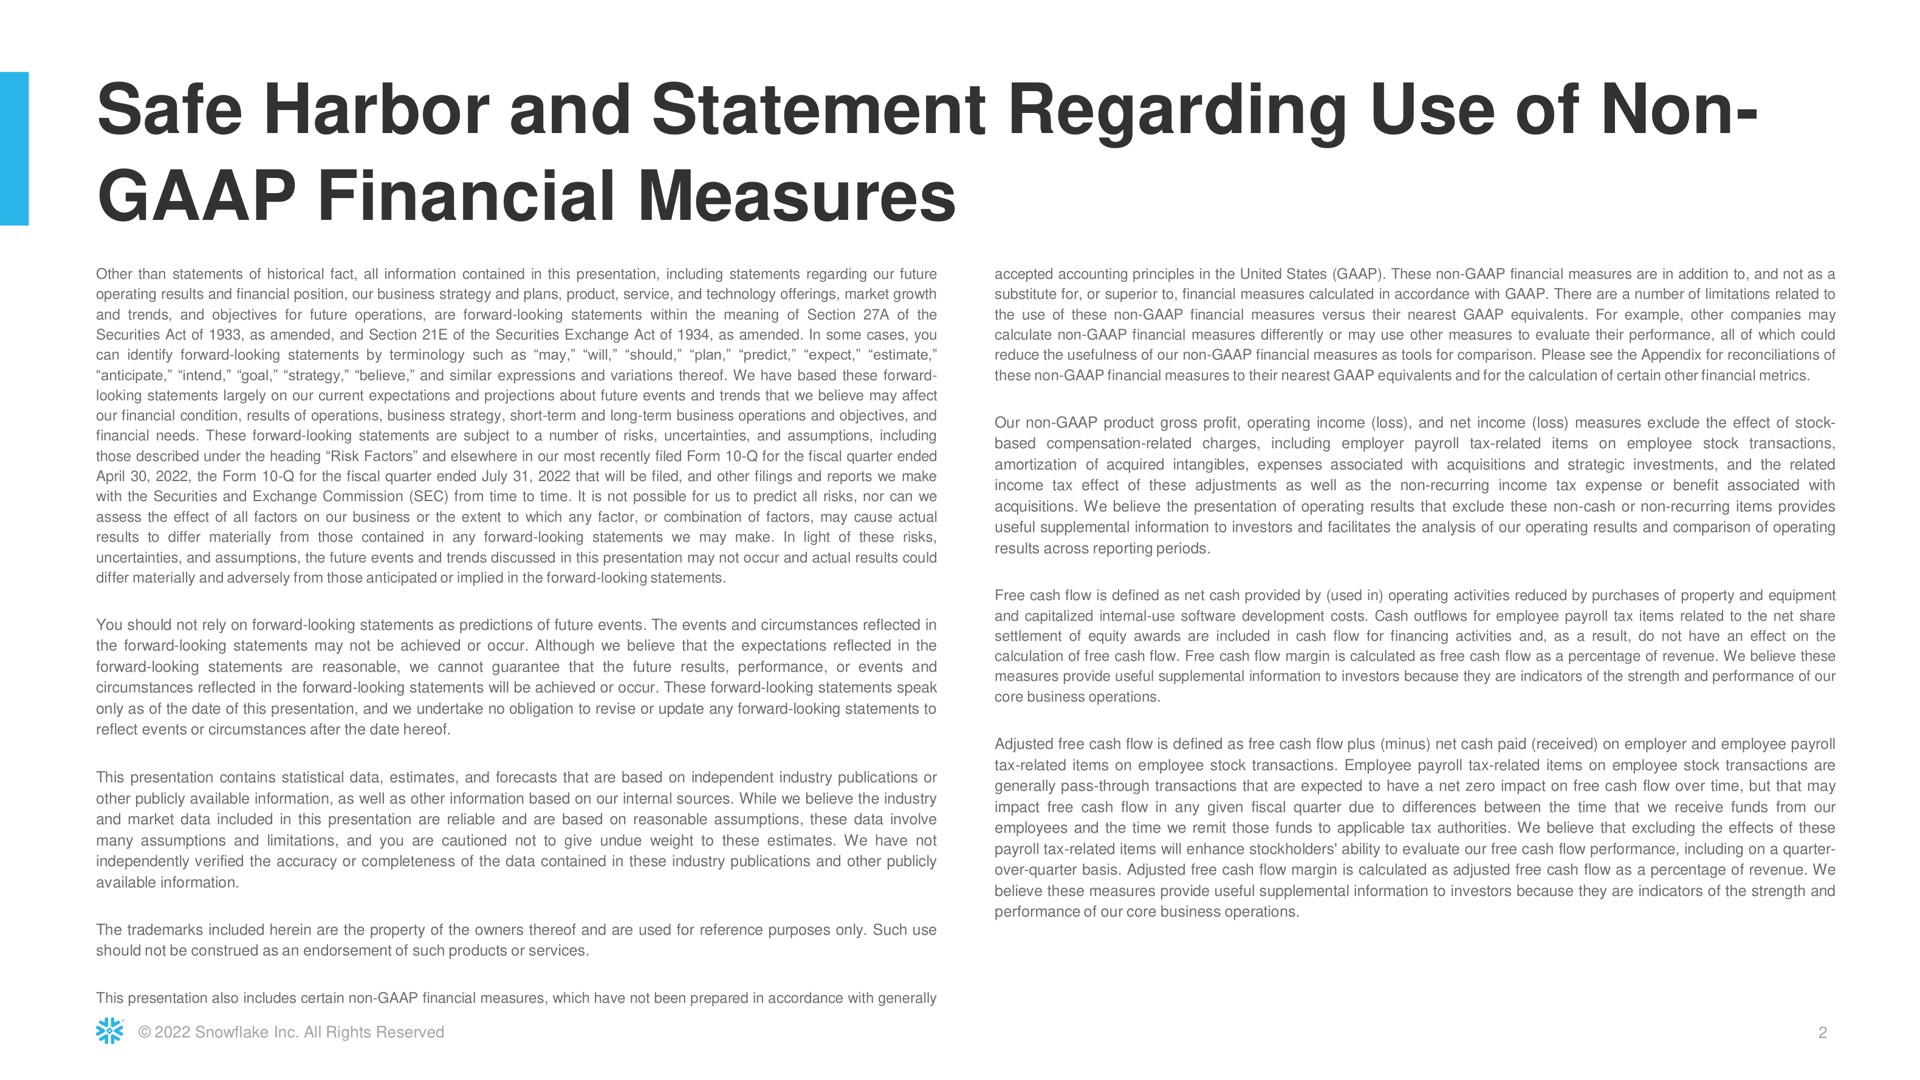 safe harbor and statement regarding use of non financial measures | Snowflake